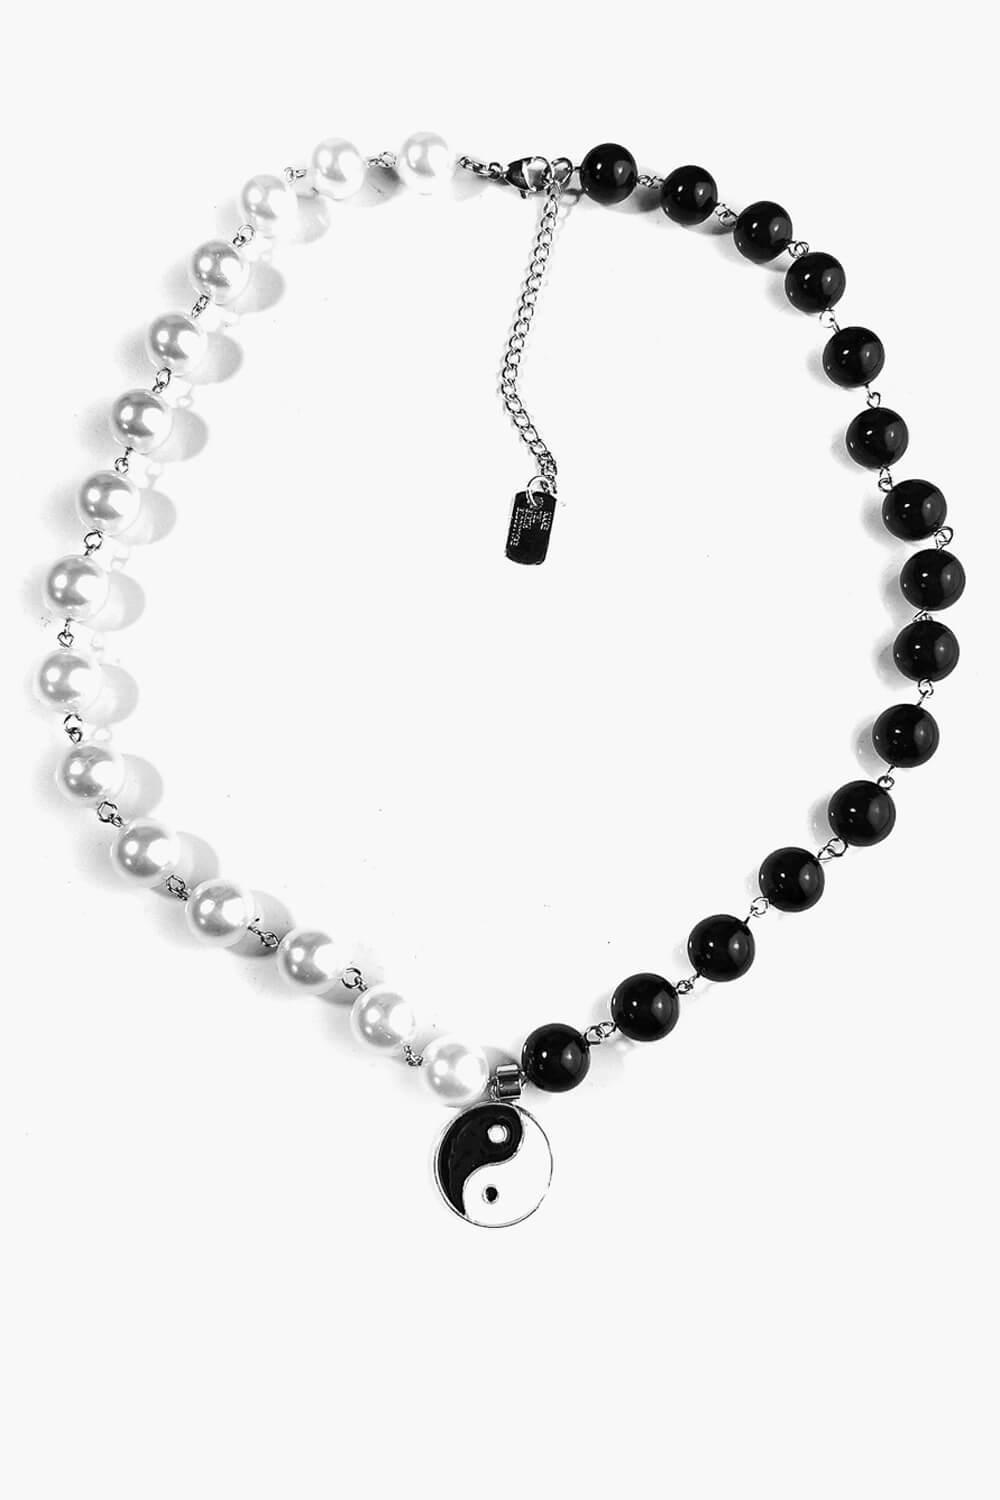 Ying Yang Necklace Black and White Beads - Aesthetic Clothes Shop